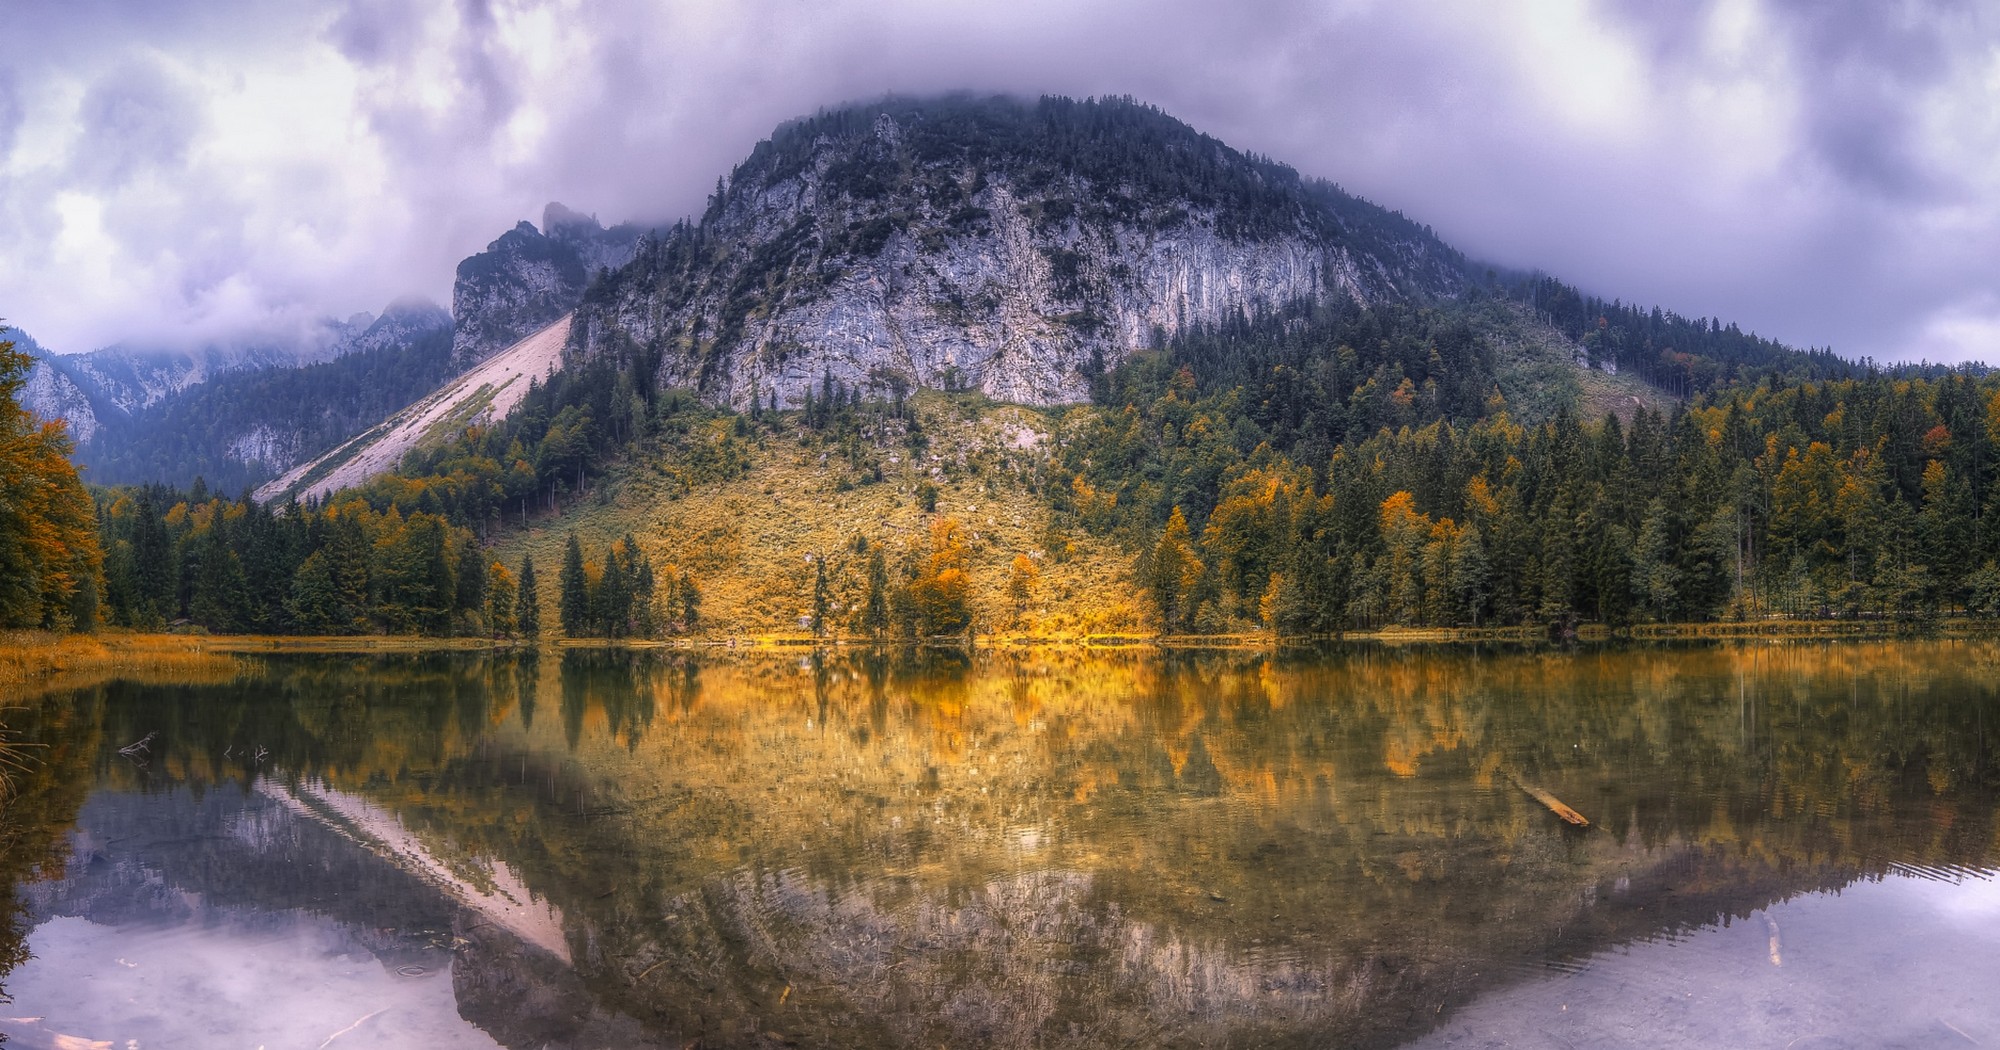 General 2000x1050 nature landscape mountains lake forest fall clouds water reflection trees calm